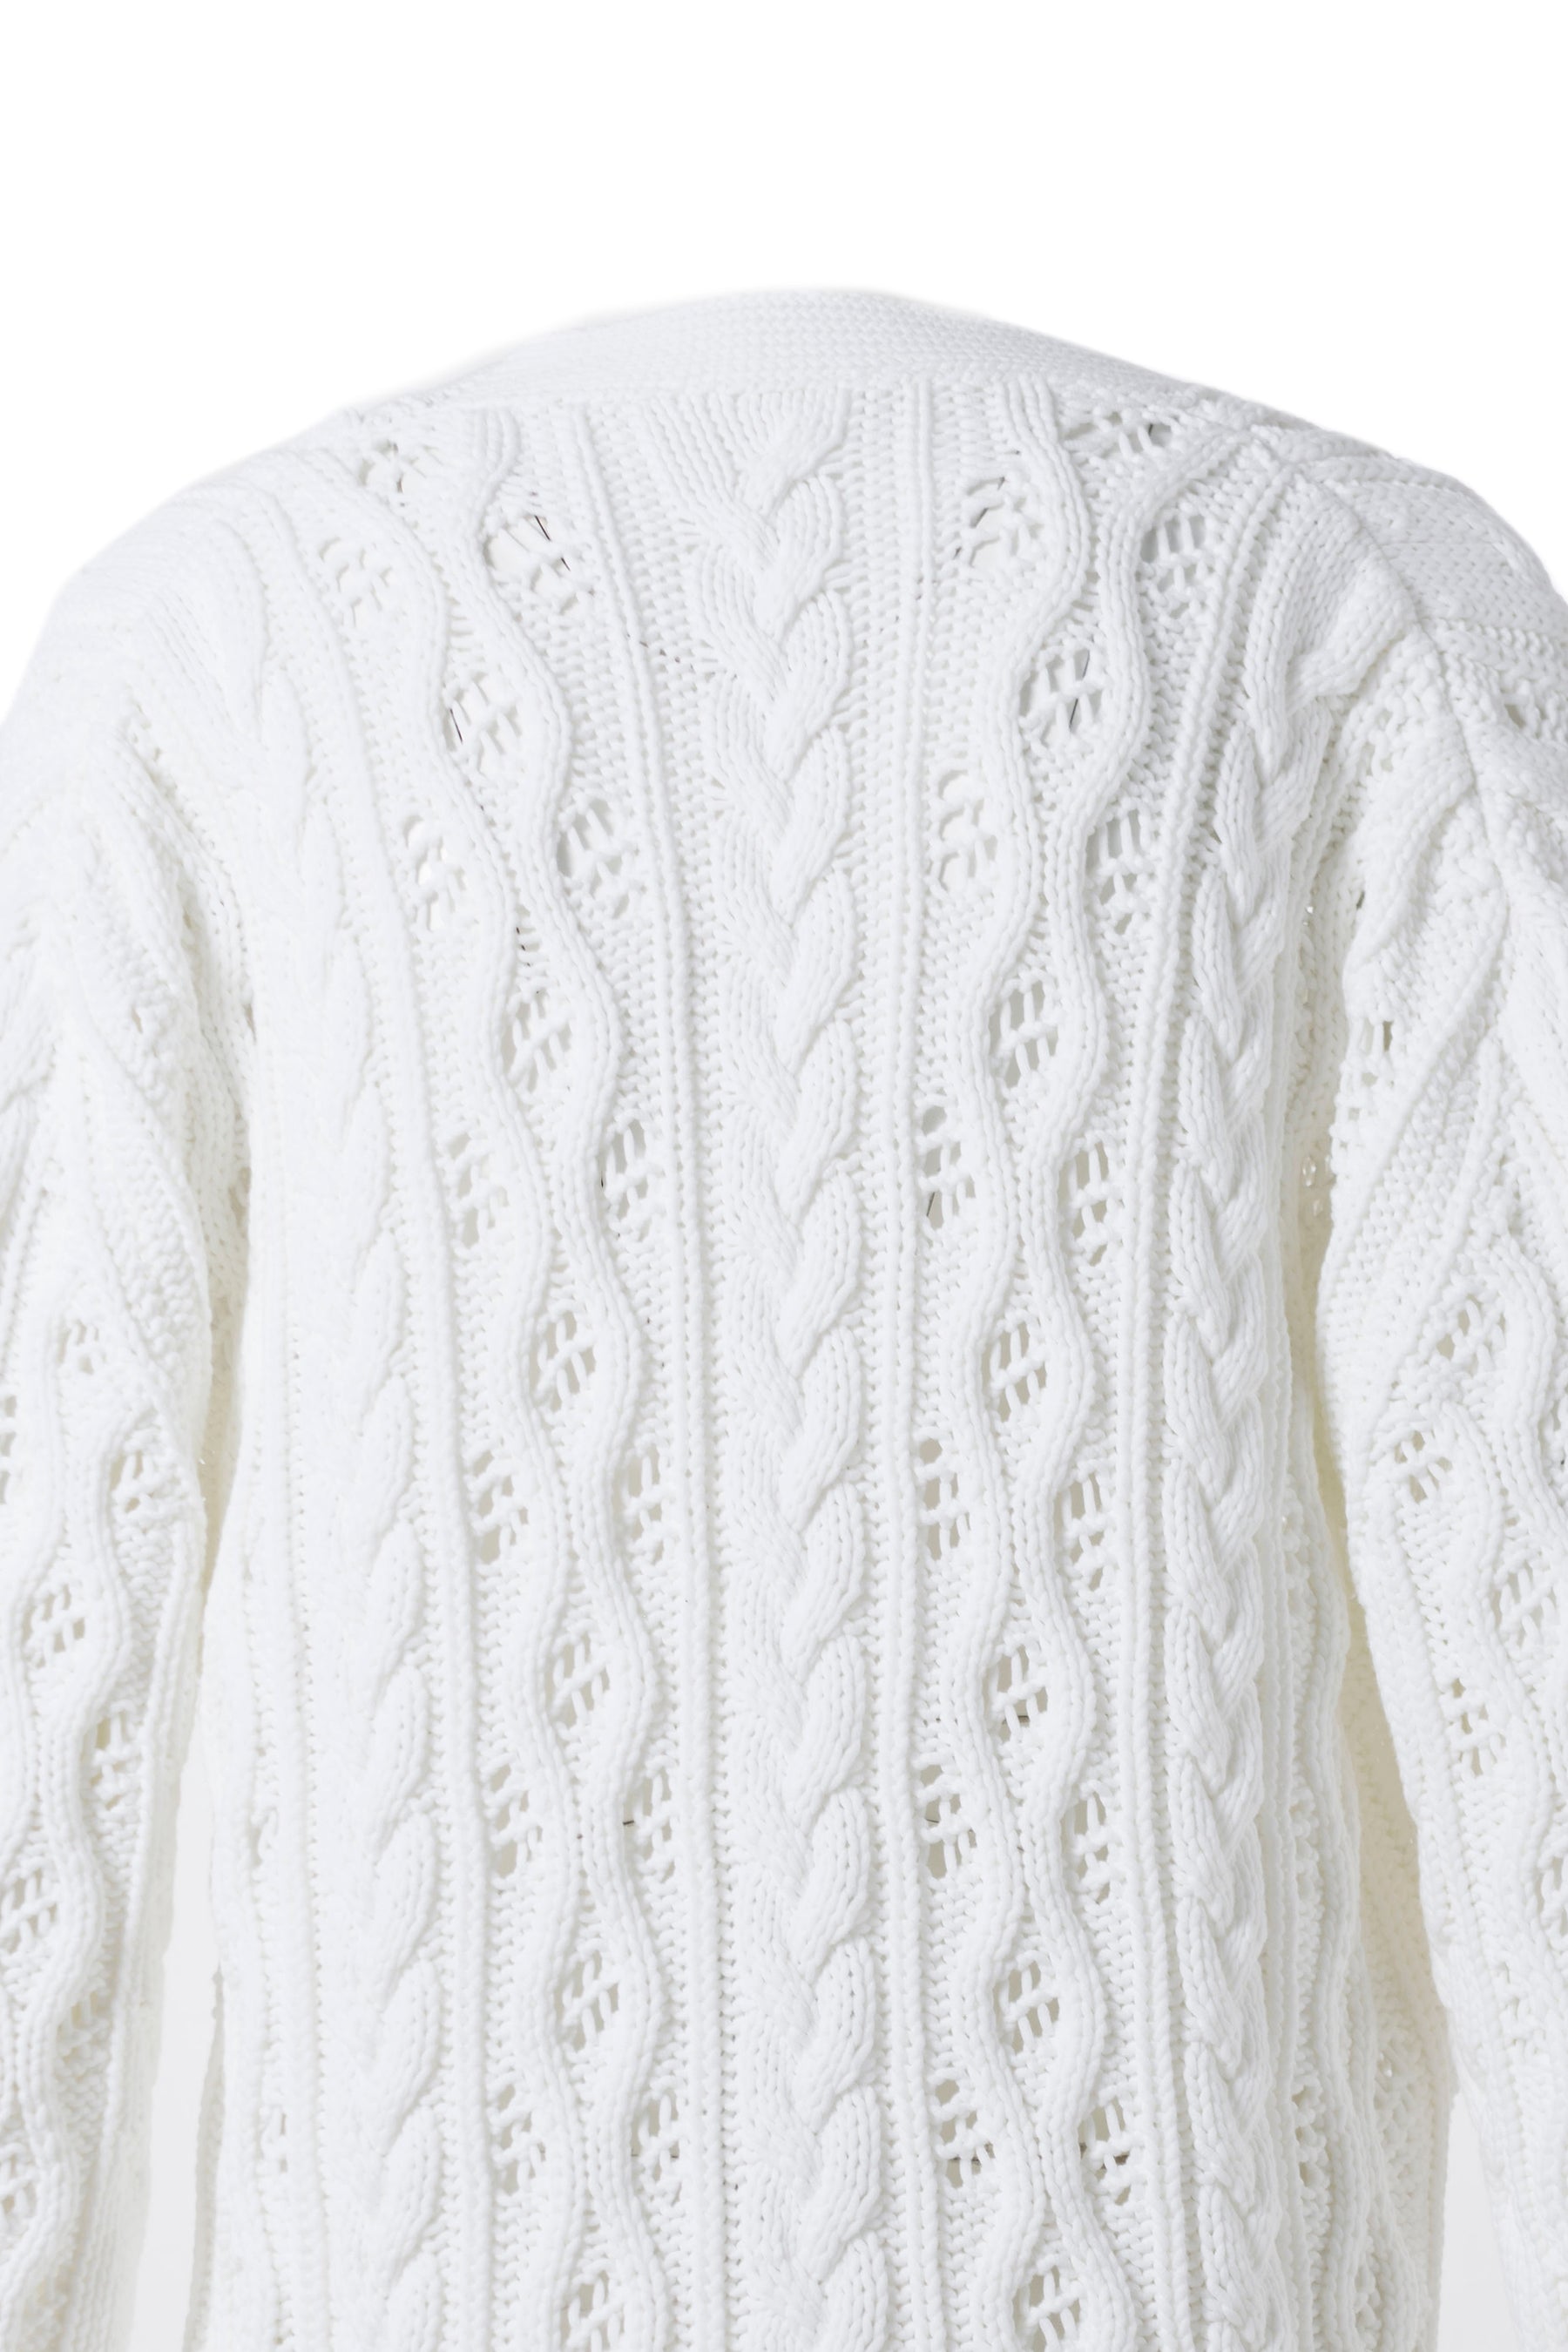 1989 SS23 CABLE KNIT CARDIGAN SWEATER / CR_ME -NUBIAN